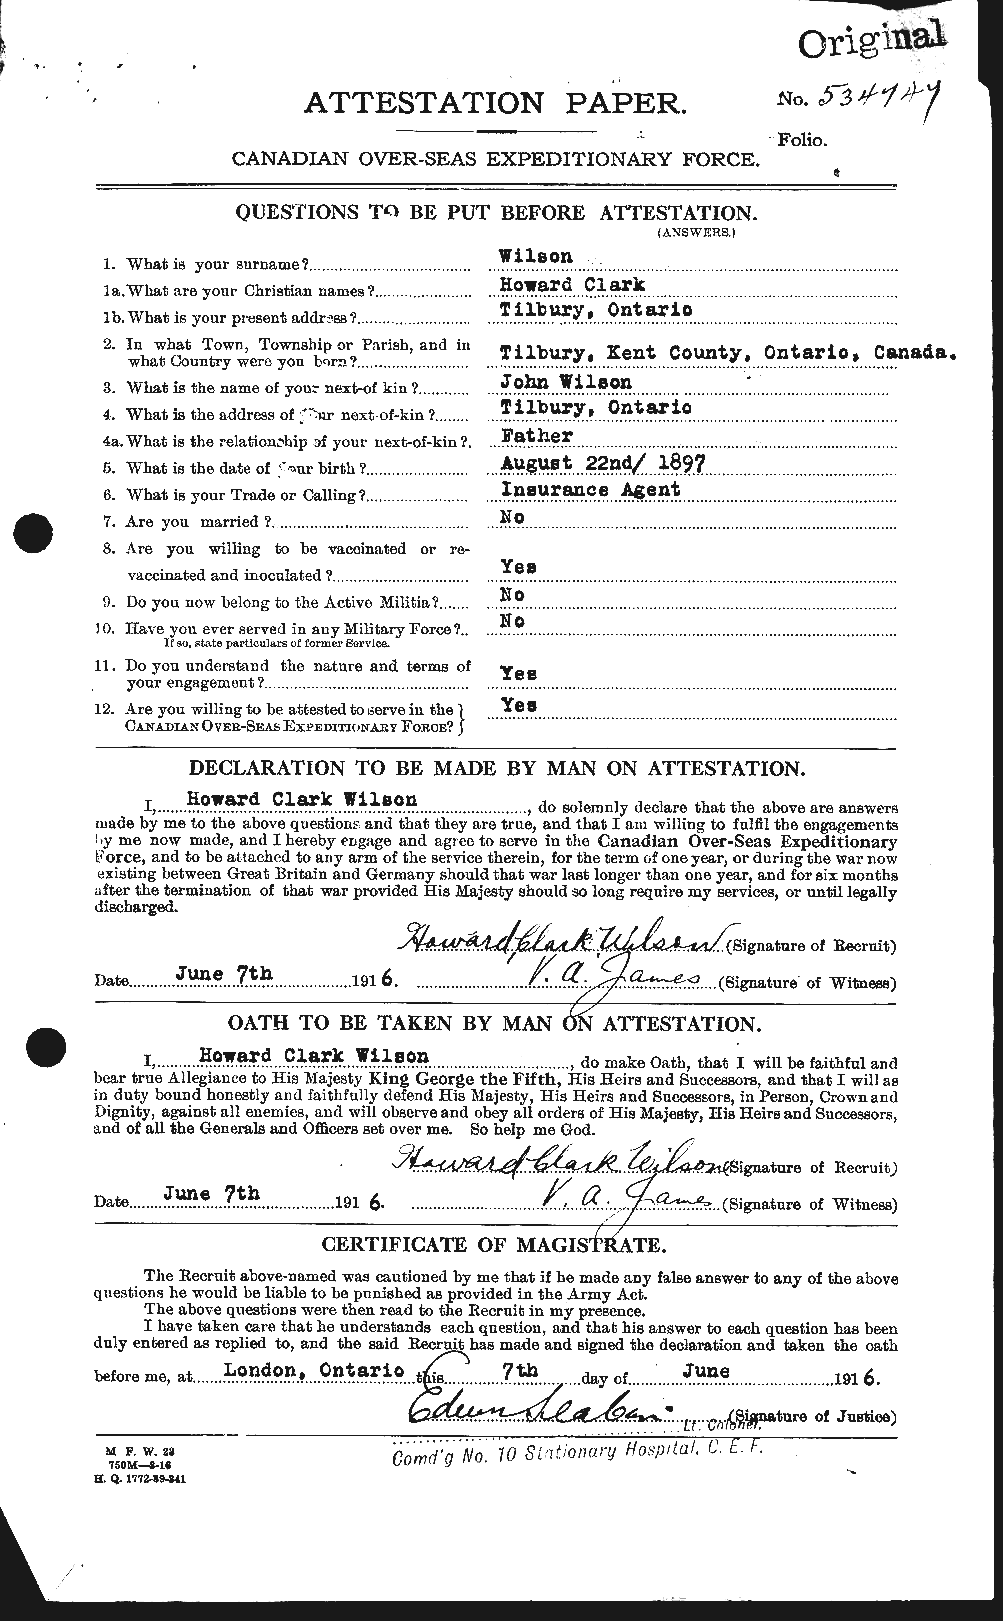 Personnel Records of the First World War - CEF 679591a